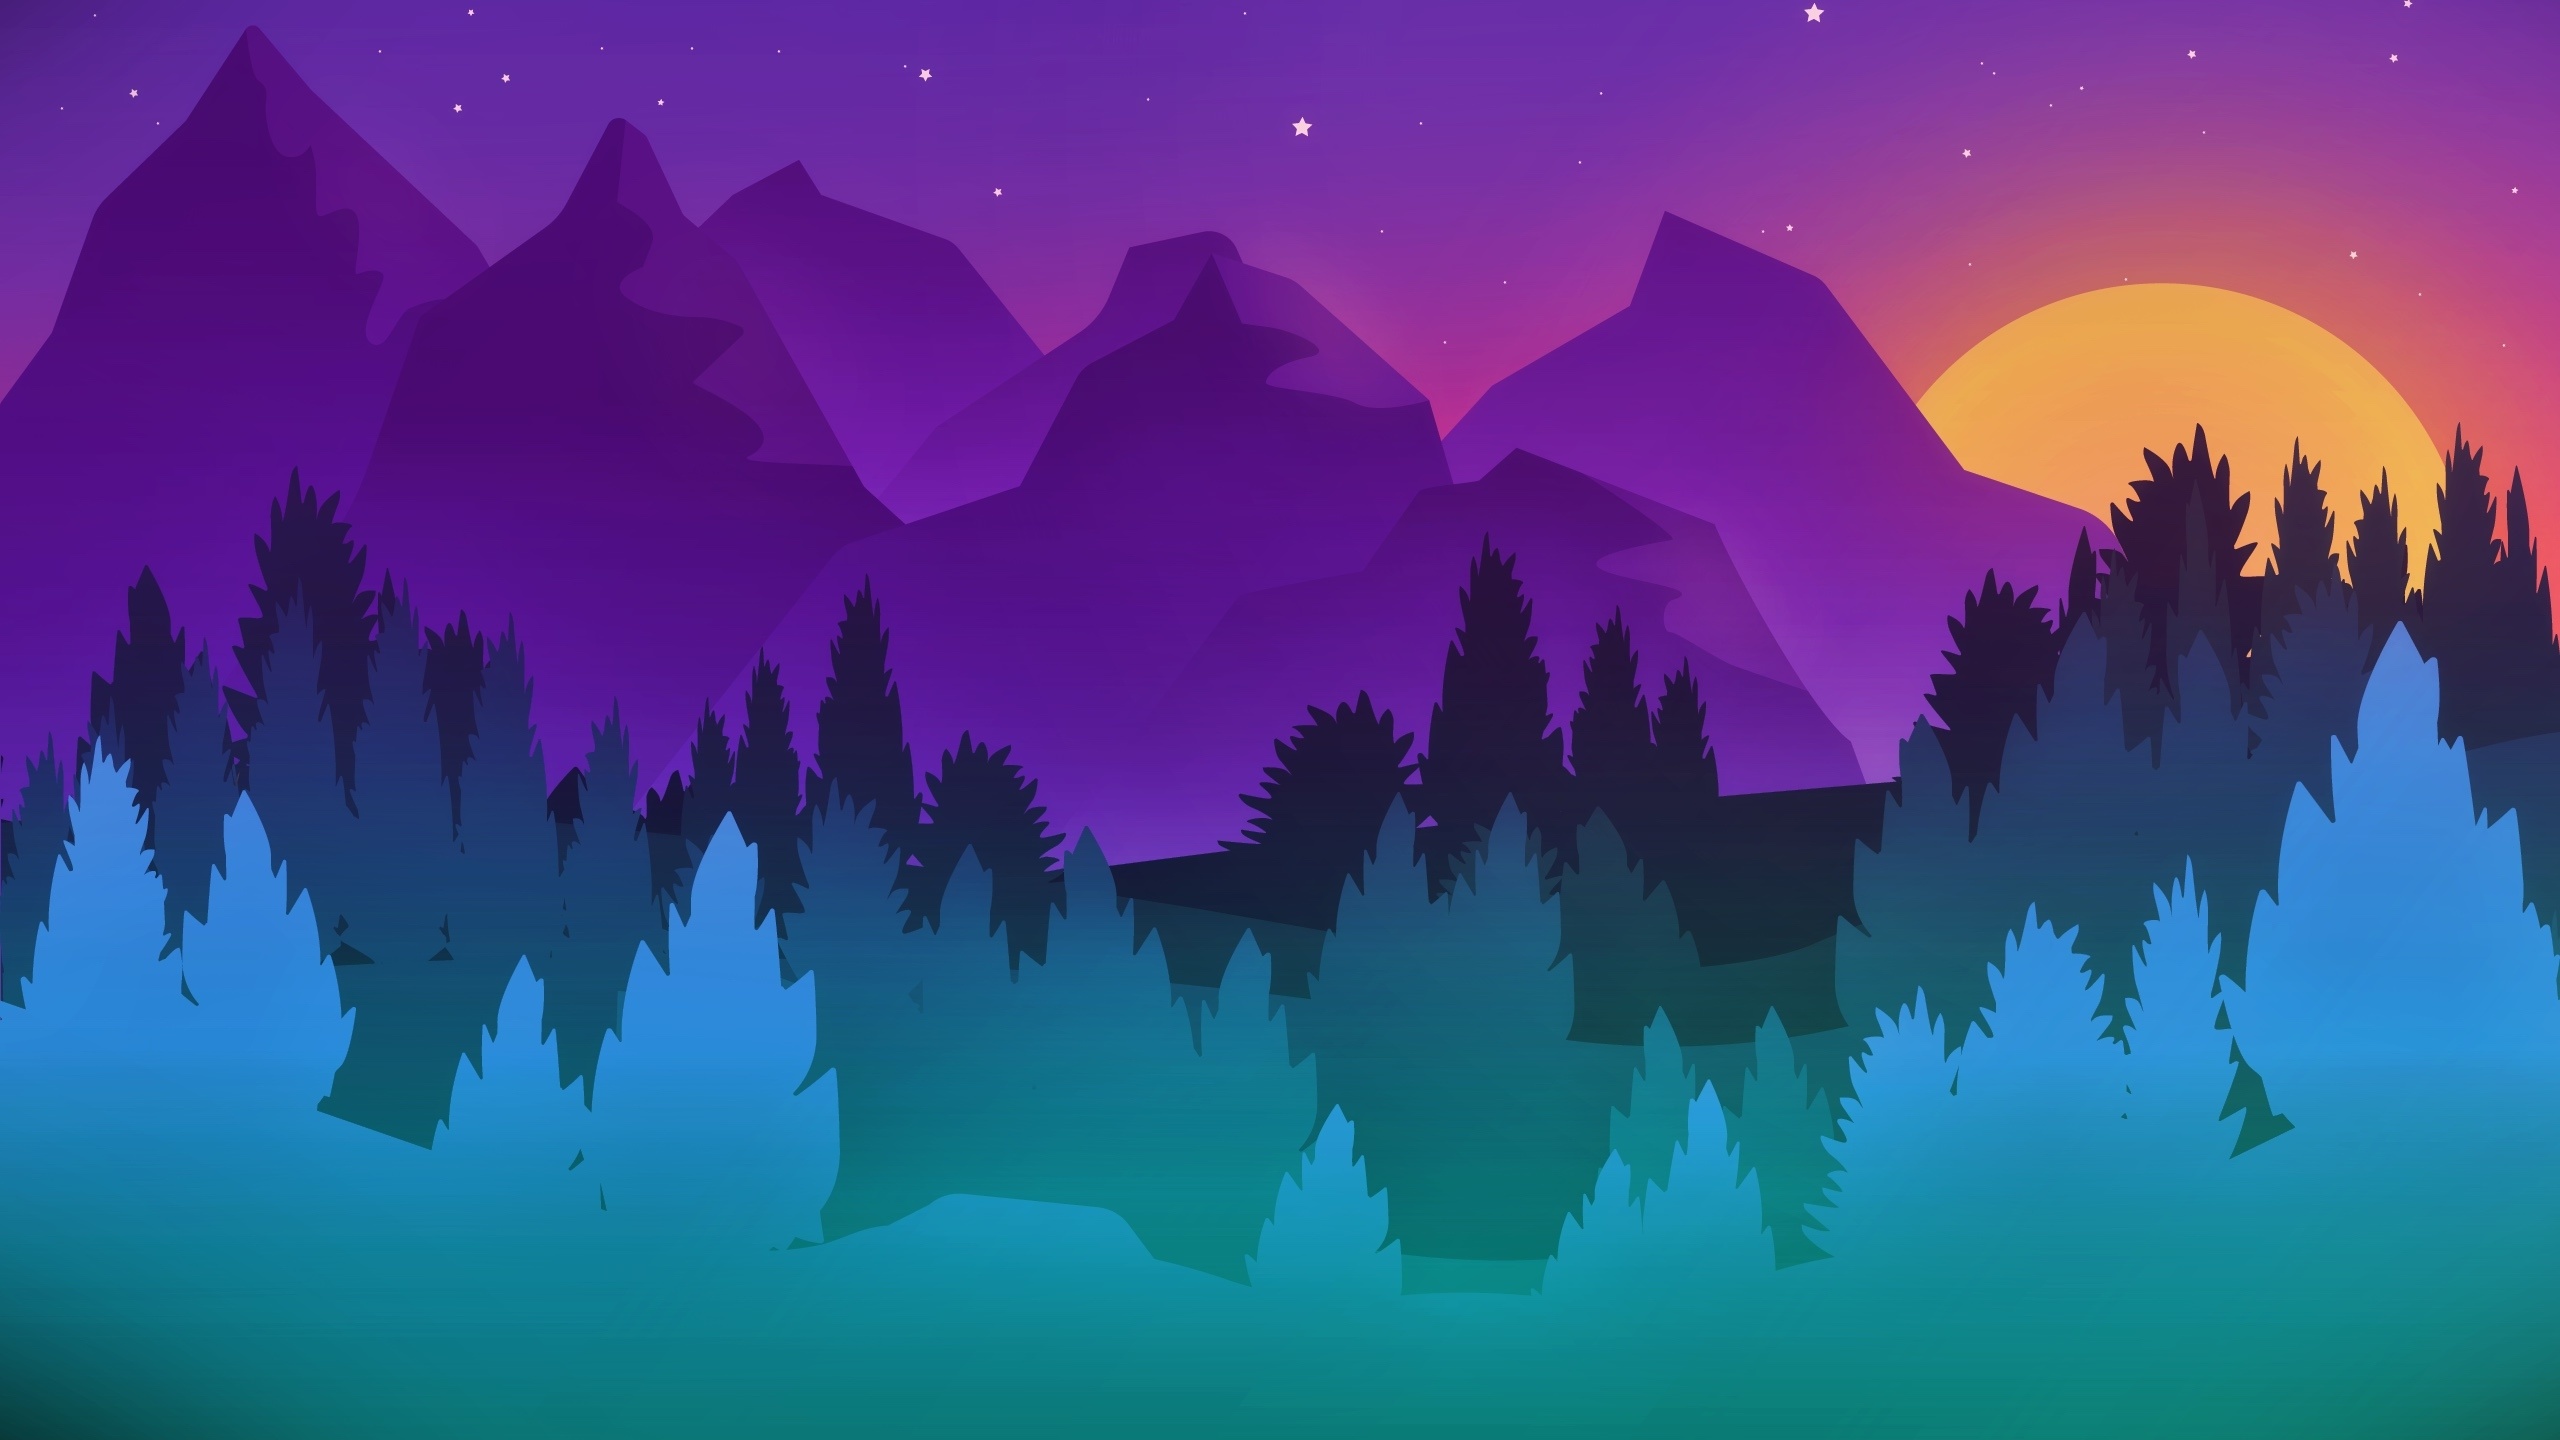 Sunset Digital Art Mountains And Forest